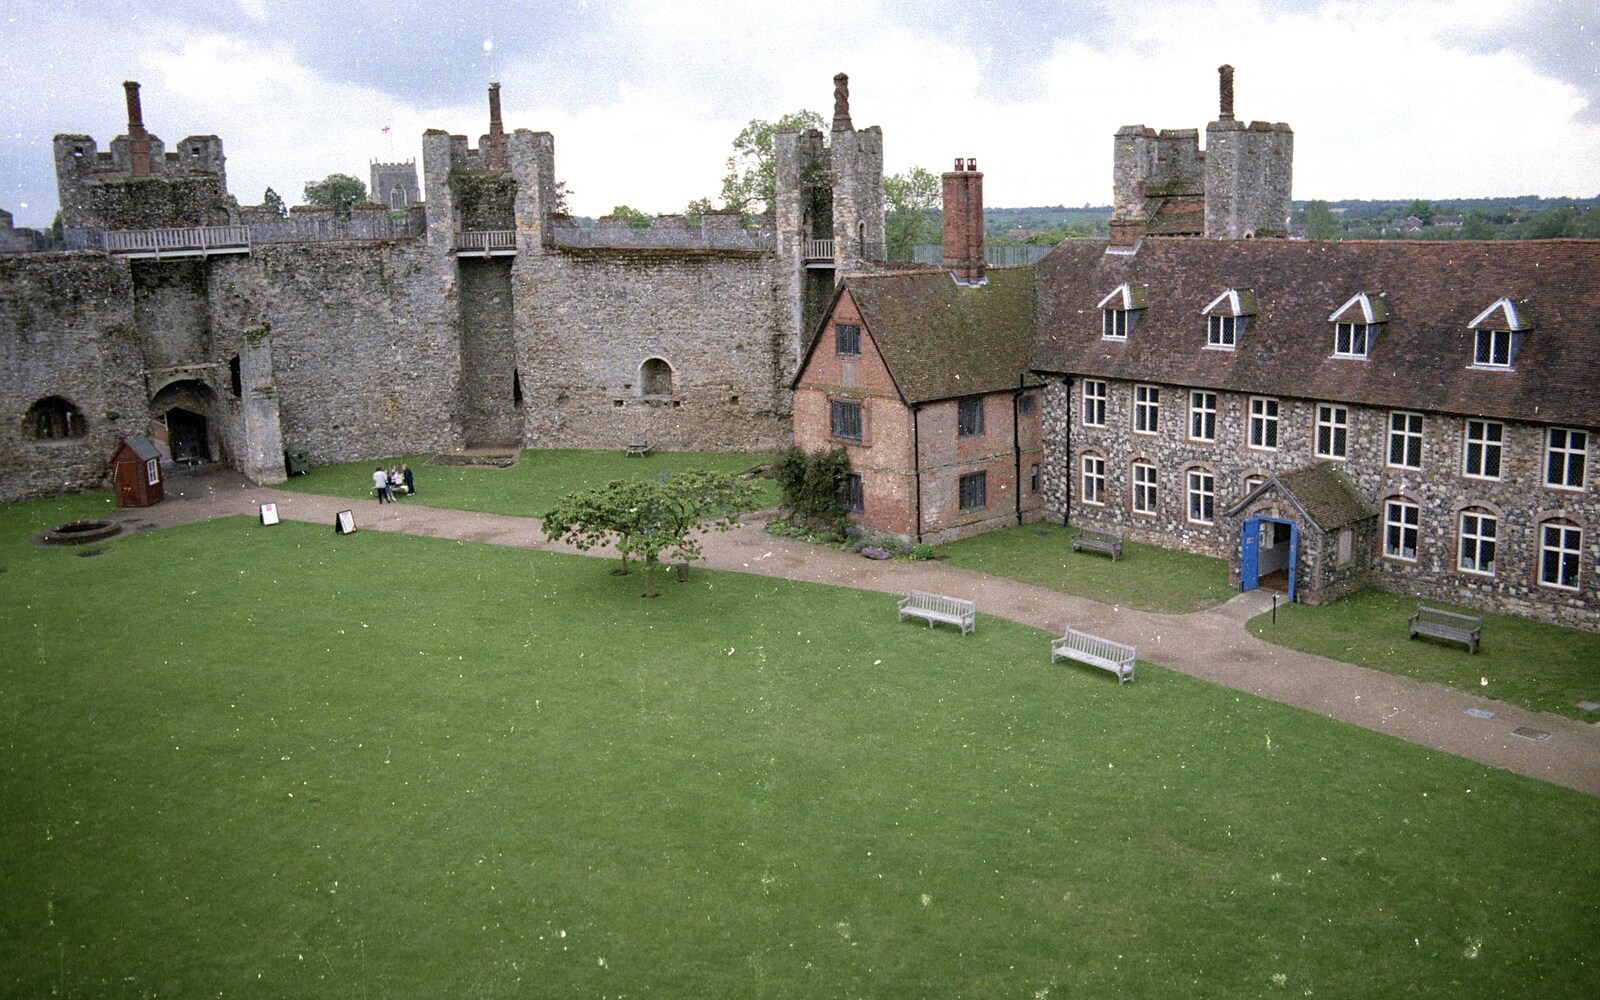 The inner courtyard at Framlingham from House Renovation Randomness and a Spot of Lightning, Brome, Suffolk - 19th June 1994